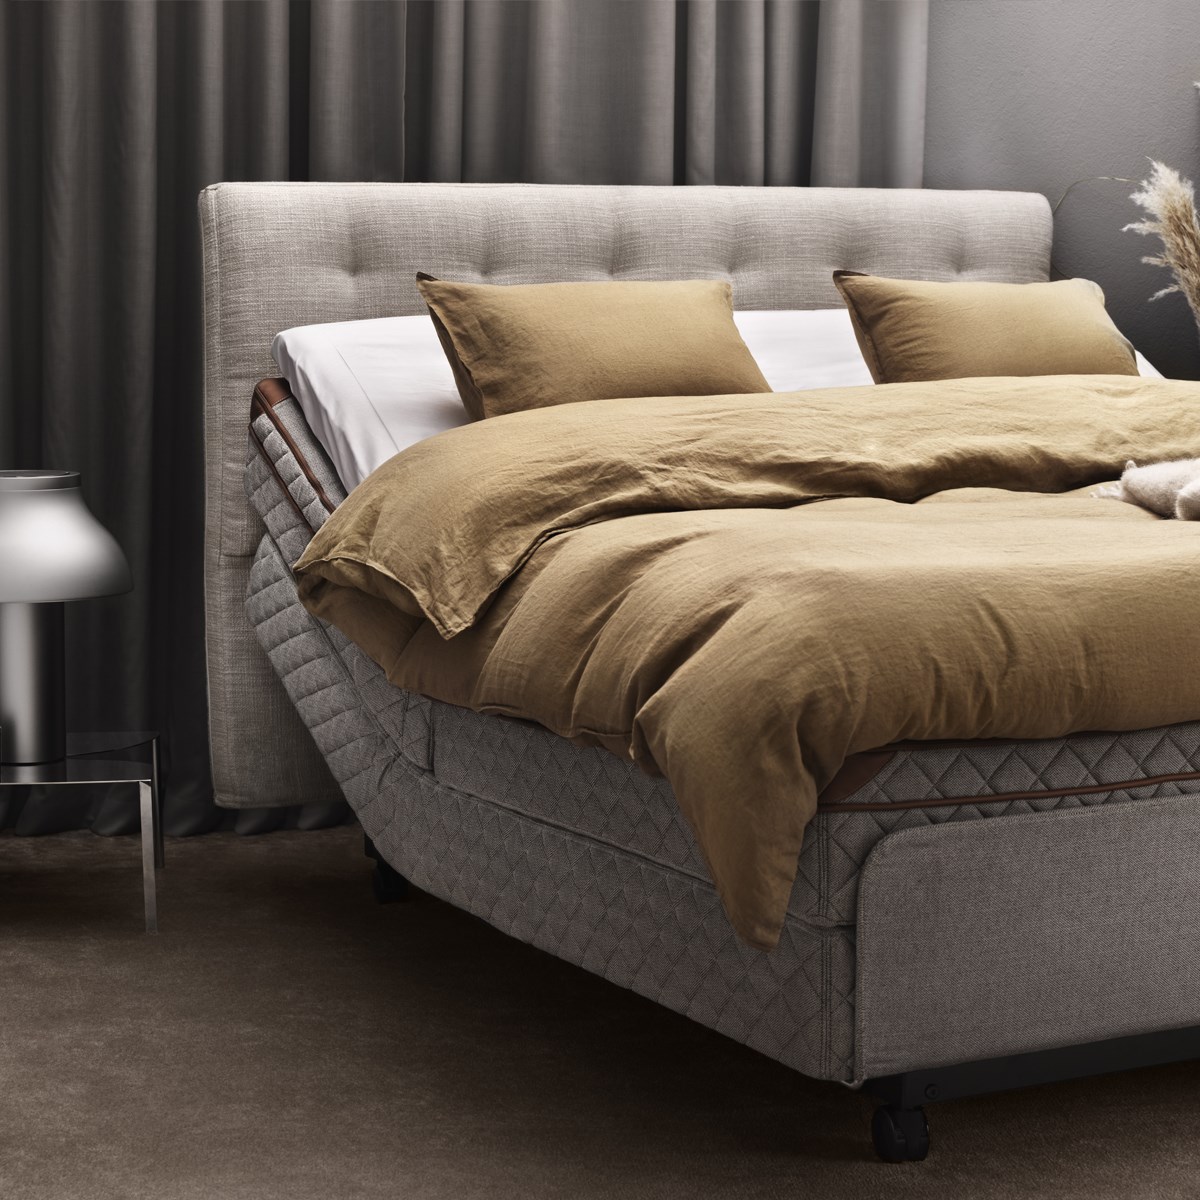 The DUX Dynamic - World's most luxurious adjustable bed